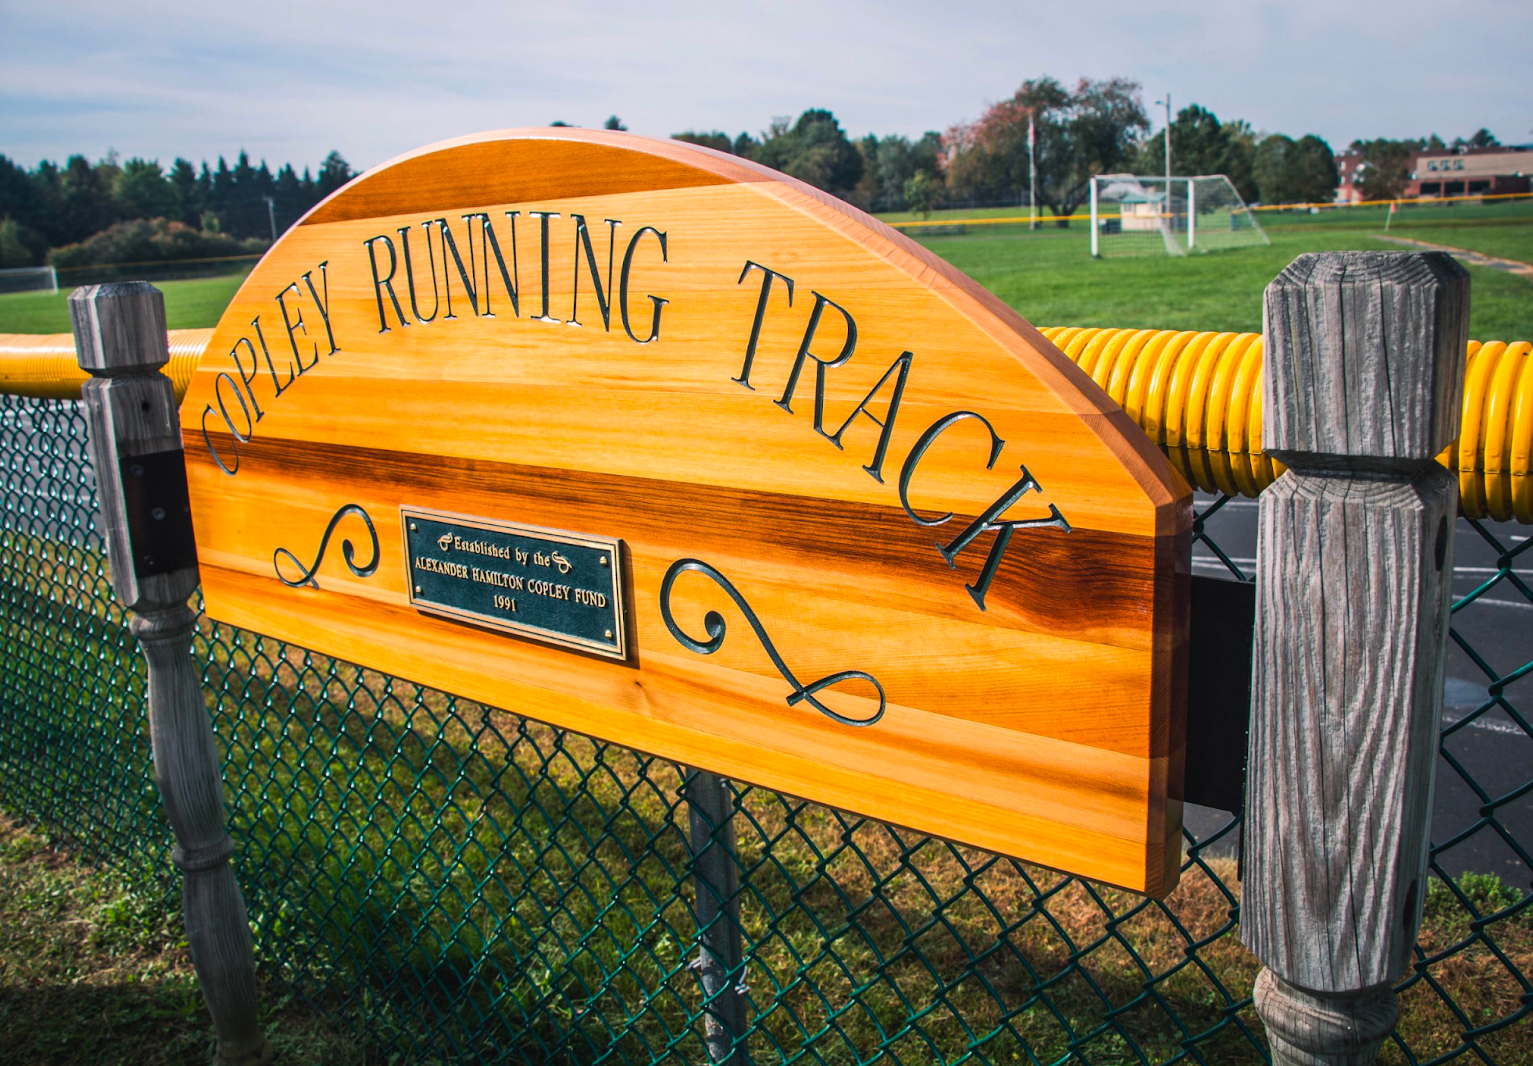 Copley Running Track sign